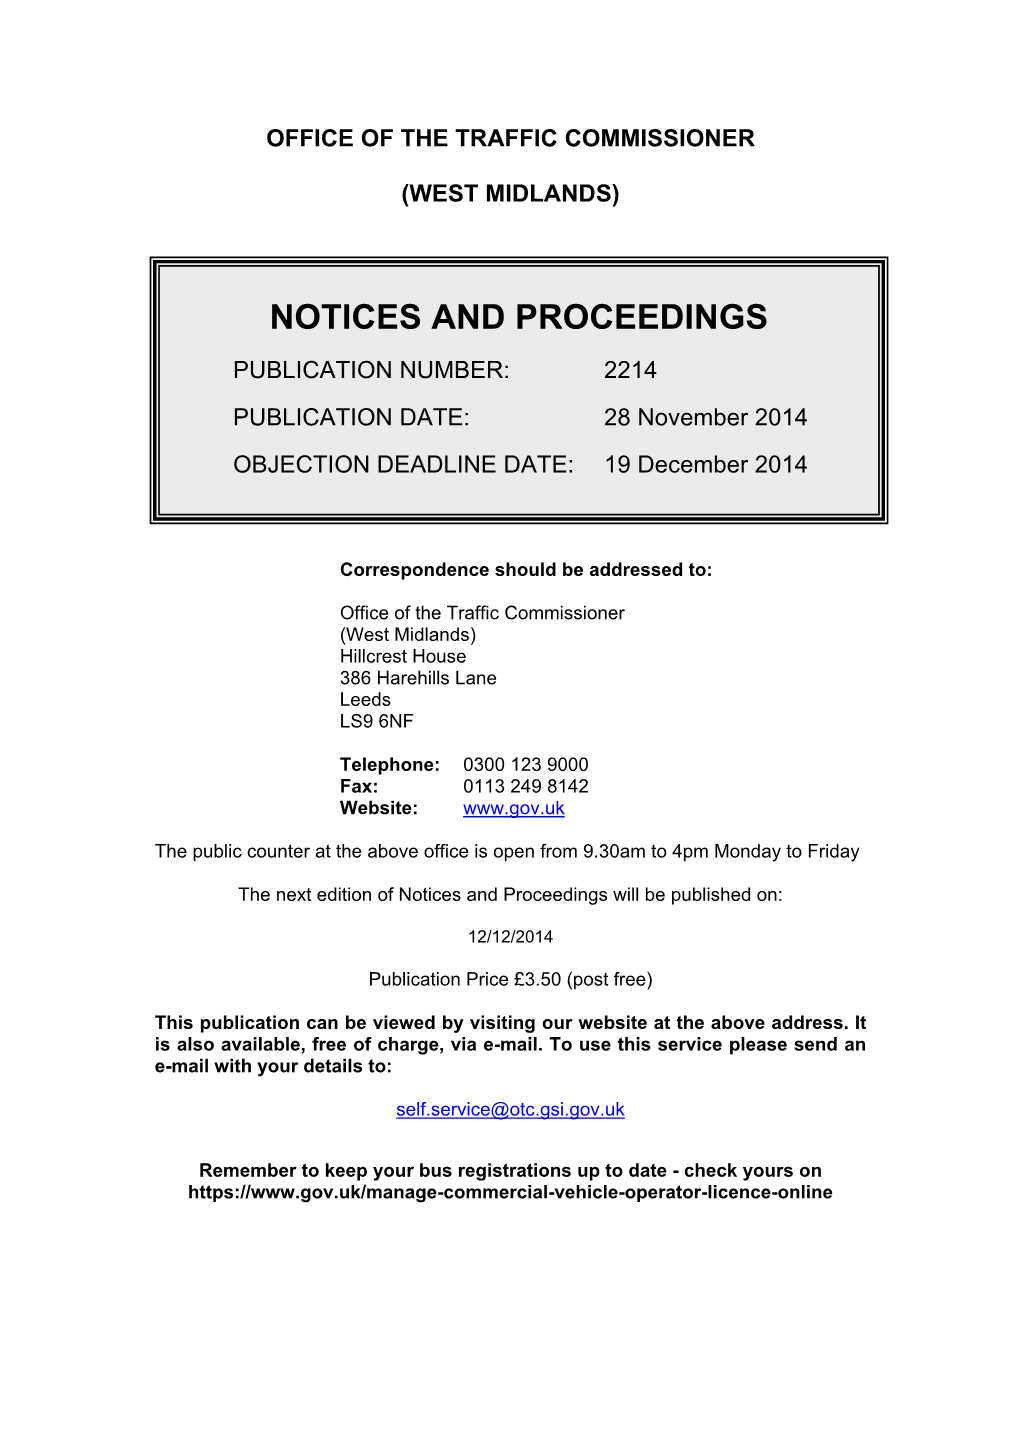 NOTICES and PROCEEDINGS 28 November 2014